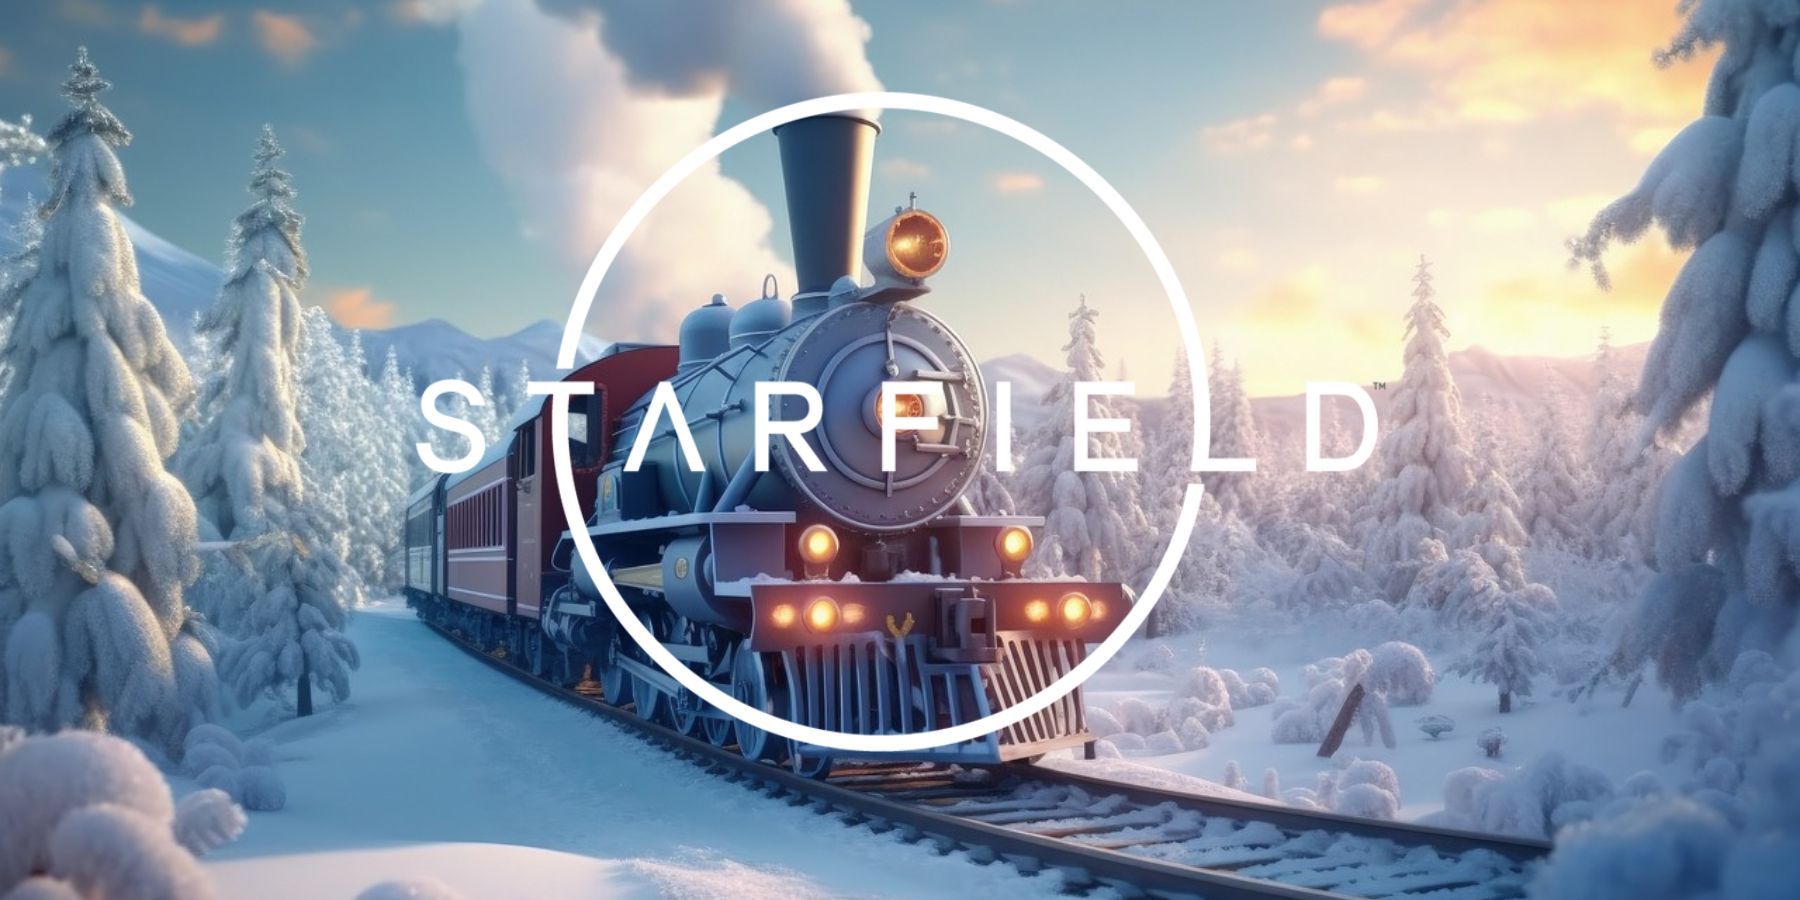 A Christmas train featuring the Starfield logo